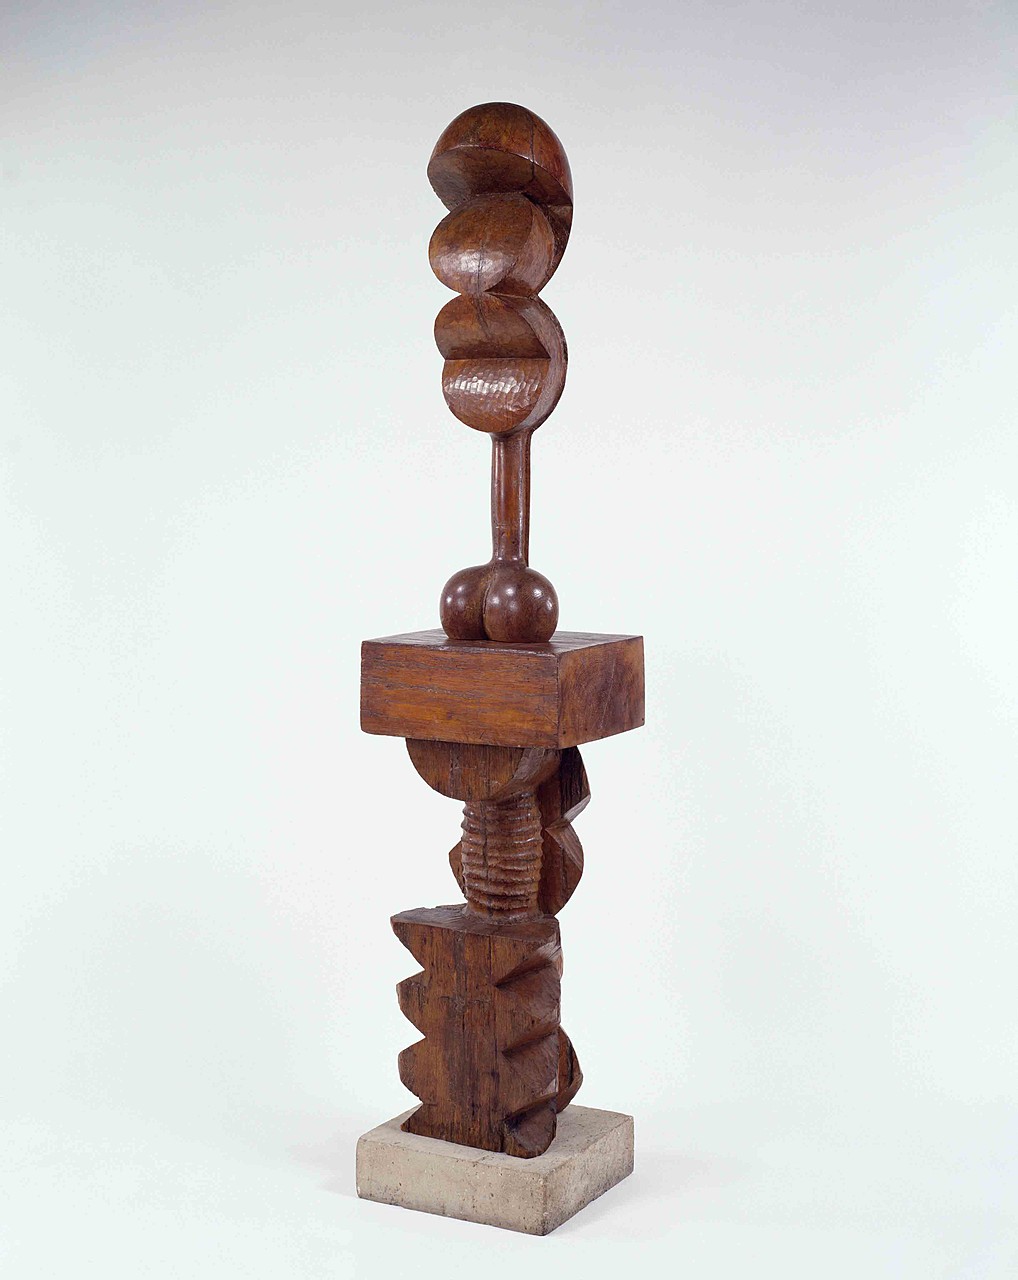 Constantin Brancusi | The Guggenheim Museums and Foundation